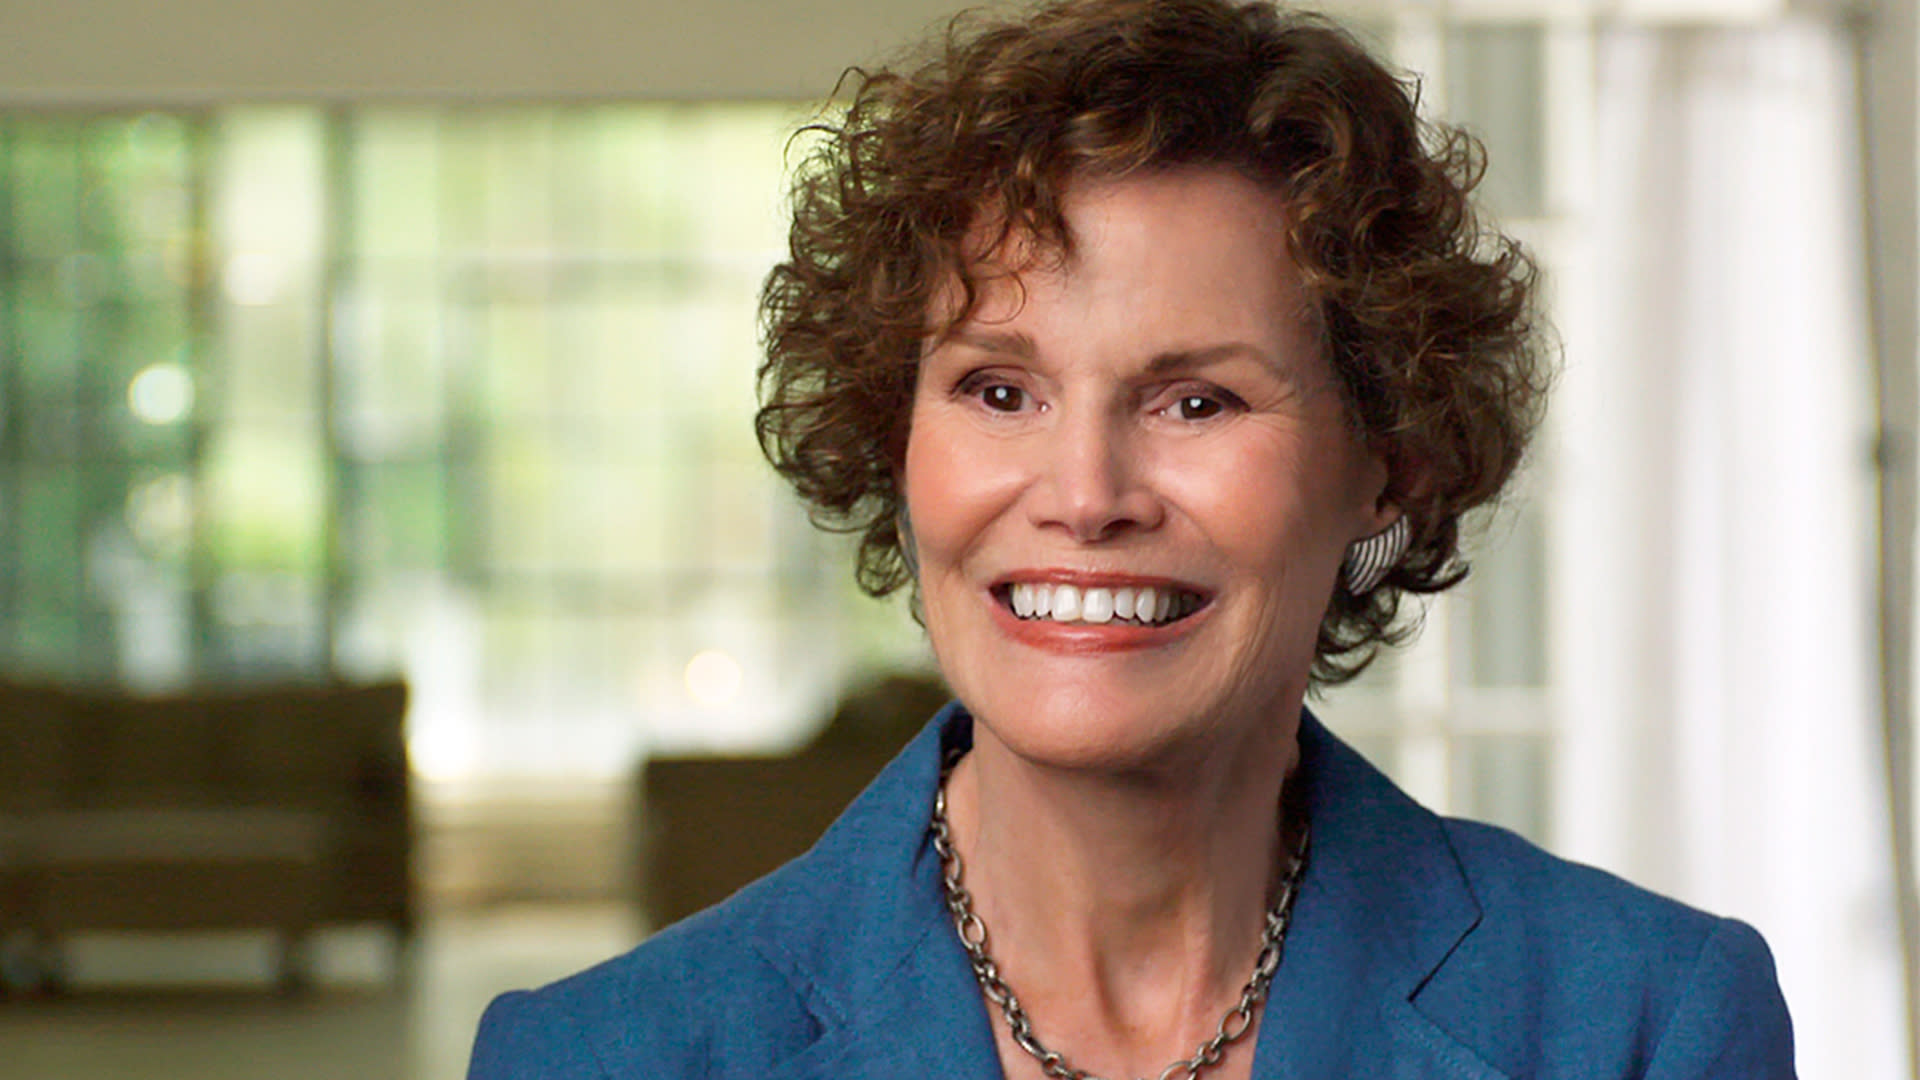 Judy Blume MAKERS Profile | The 2020 MAKERS Conference [Video]1920 x 1080